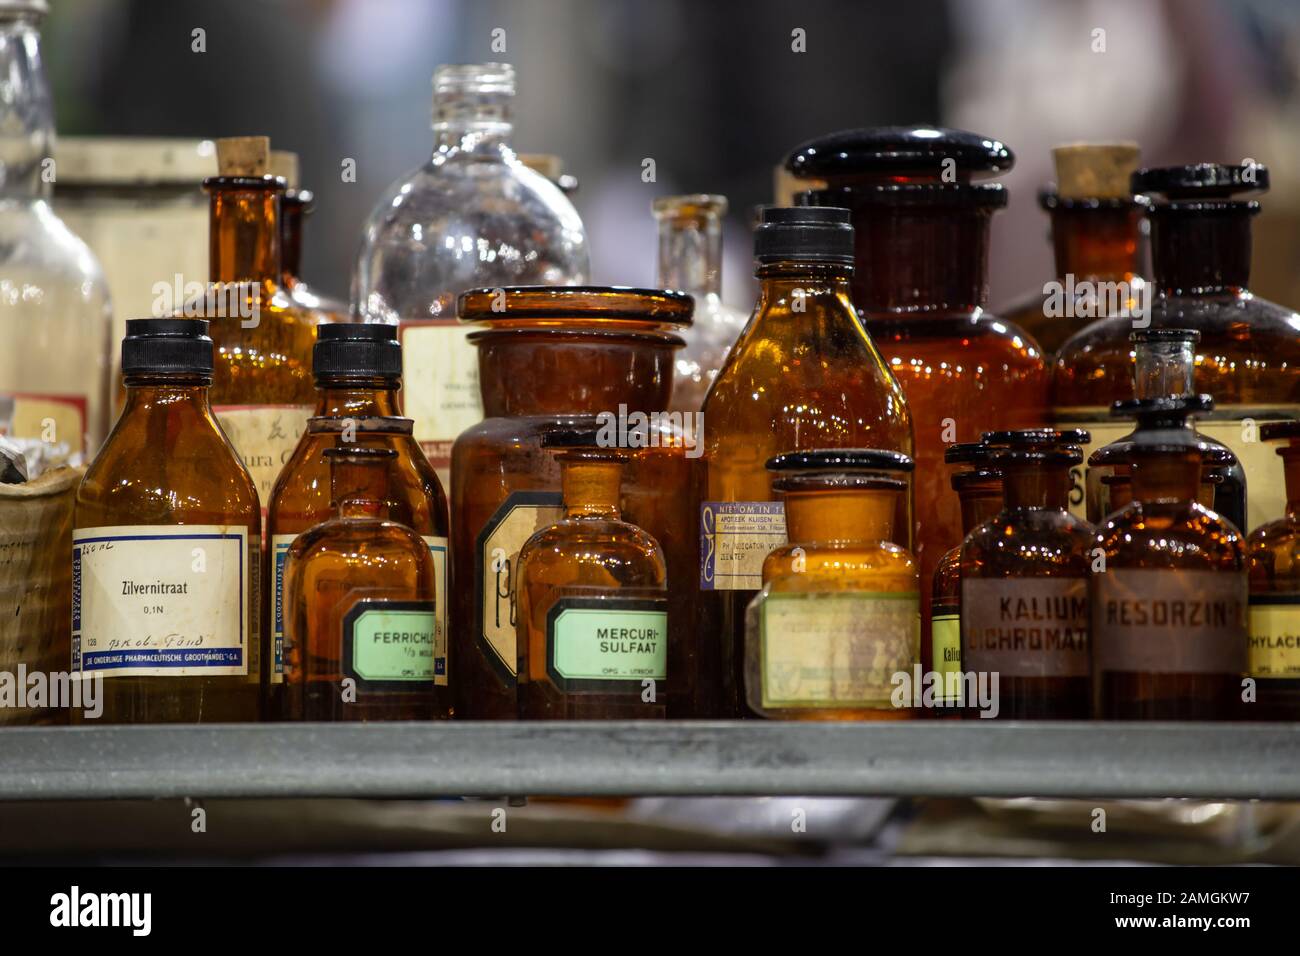 Arnhem, Netherlands, January 2020: Collection of vintage pharmacy bottles made of brown glass and with Dutch labels Stock Photo